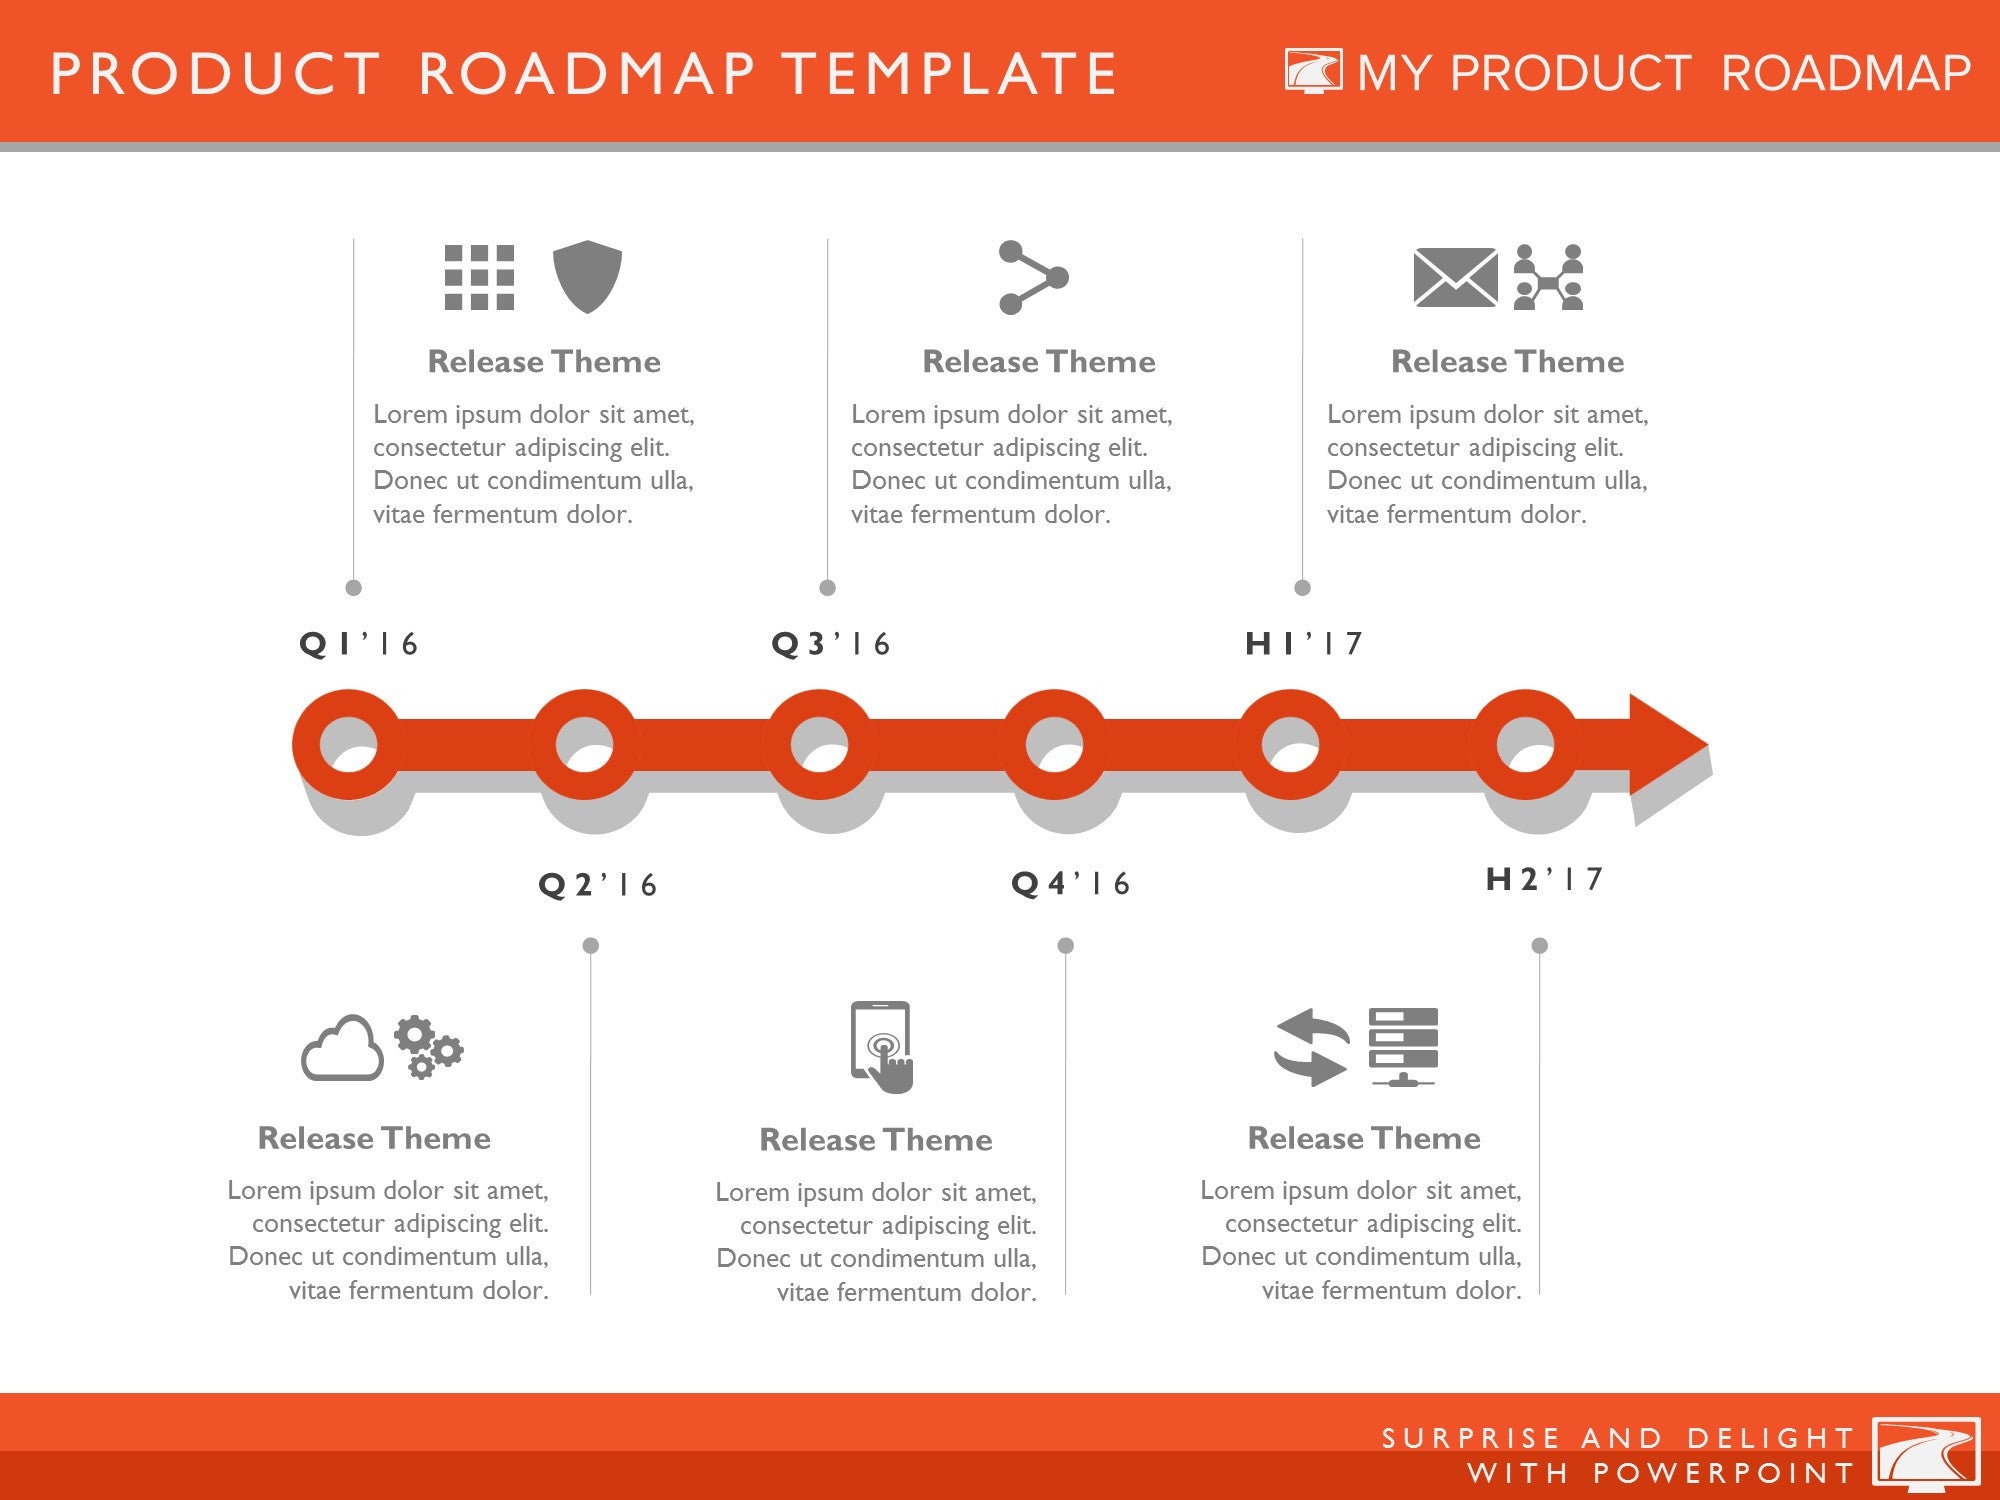 5 Stage It Roadmap Timeline Product Roadmap Templates 2163